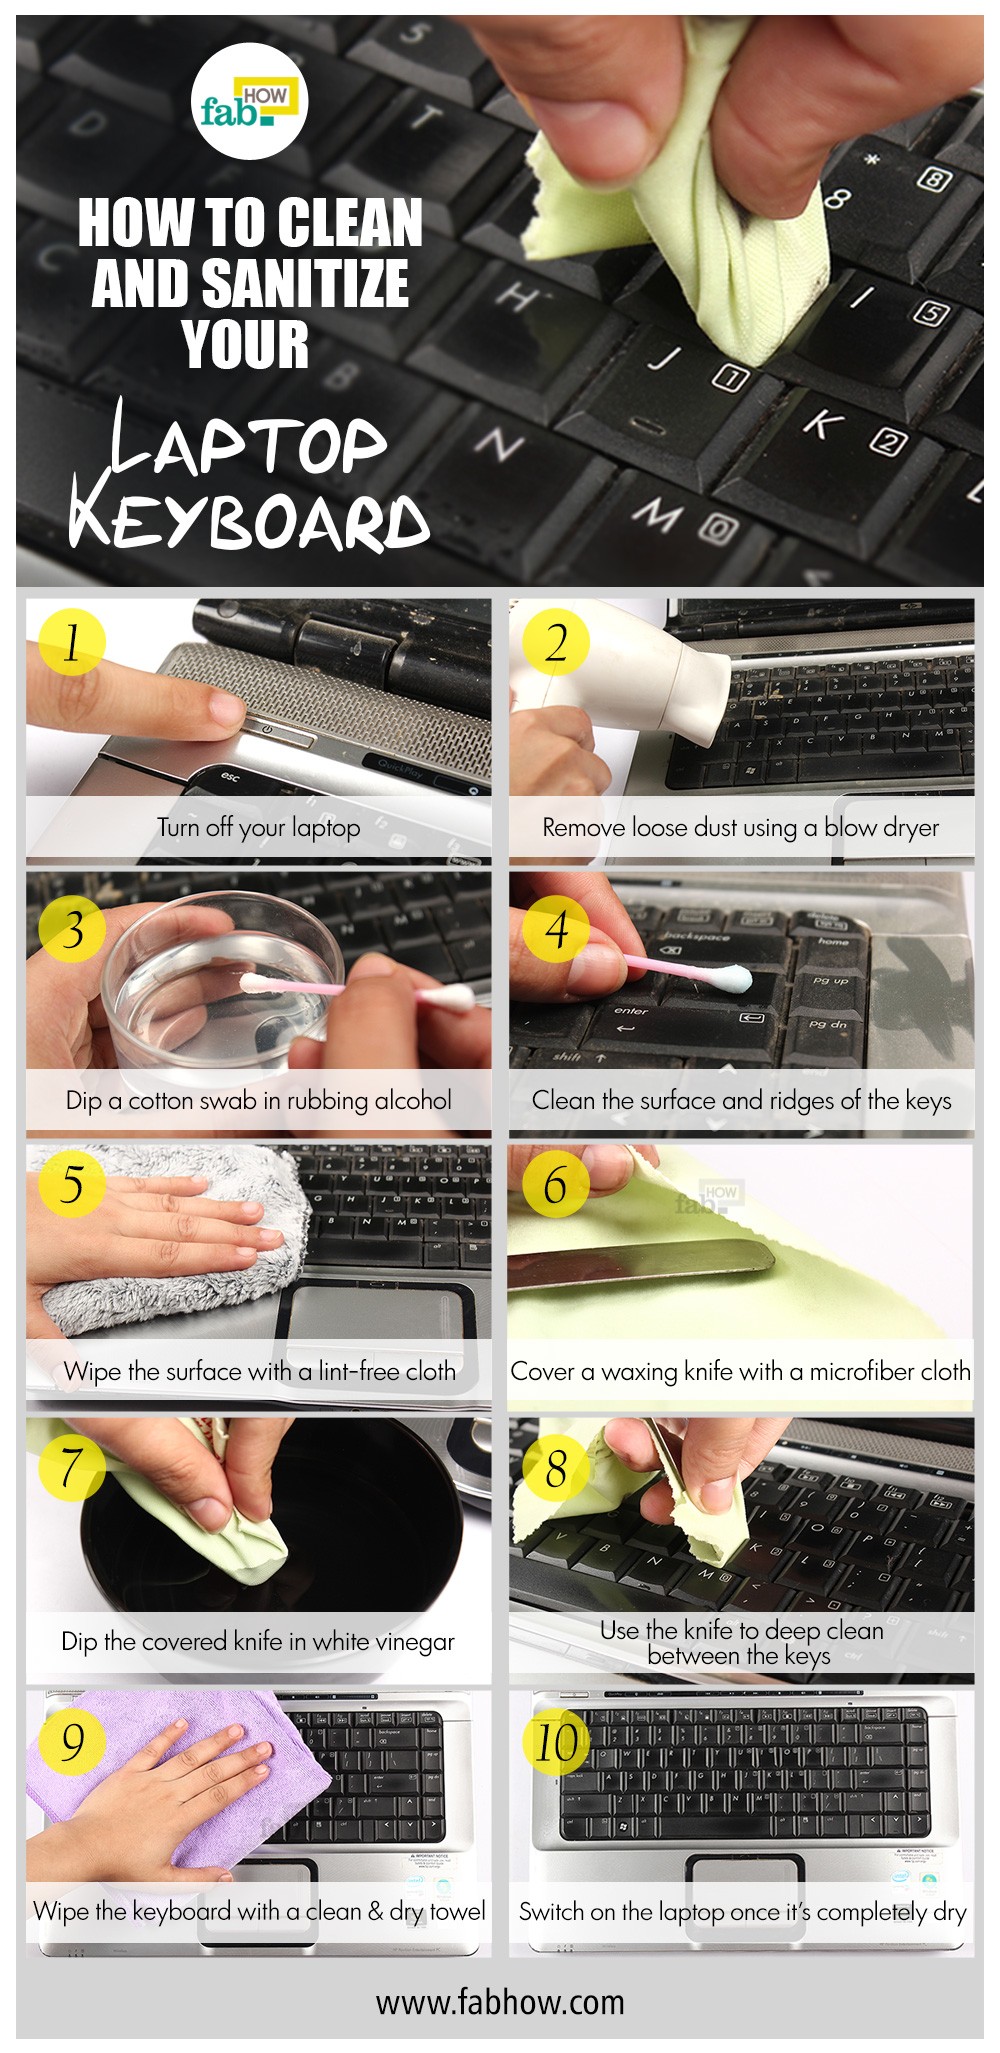 How to Safely Clean your Laptop Keyboard - An Infographic from Fab How